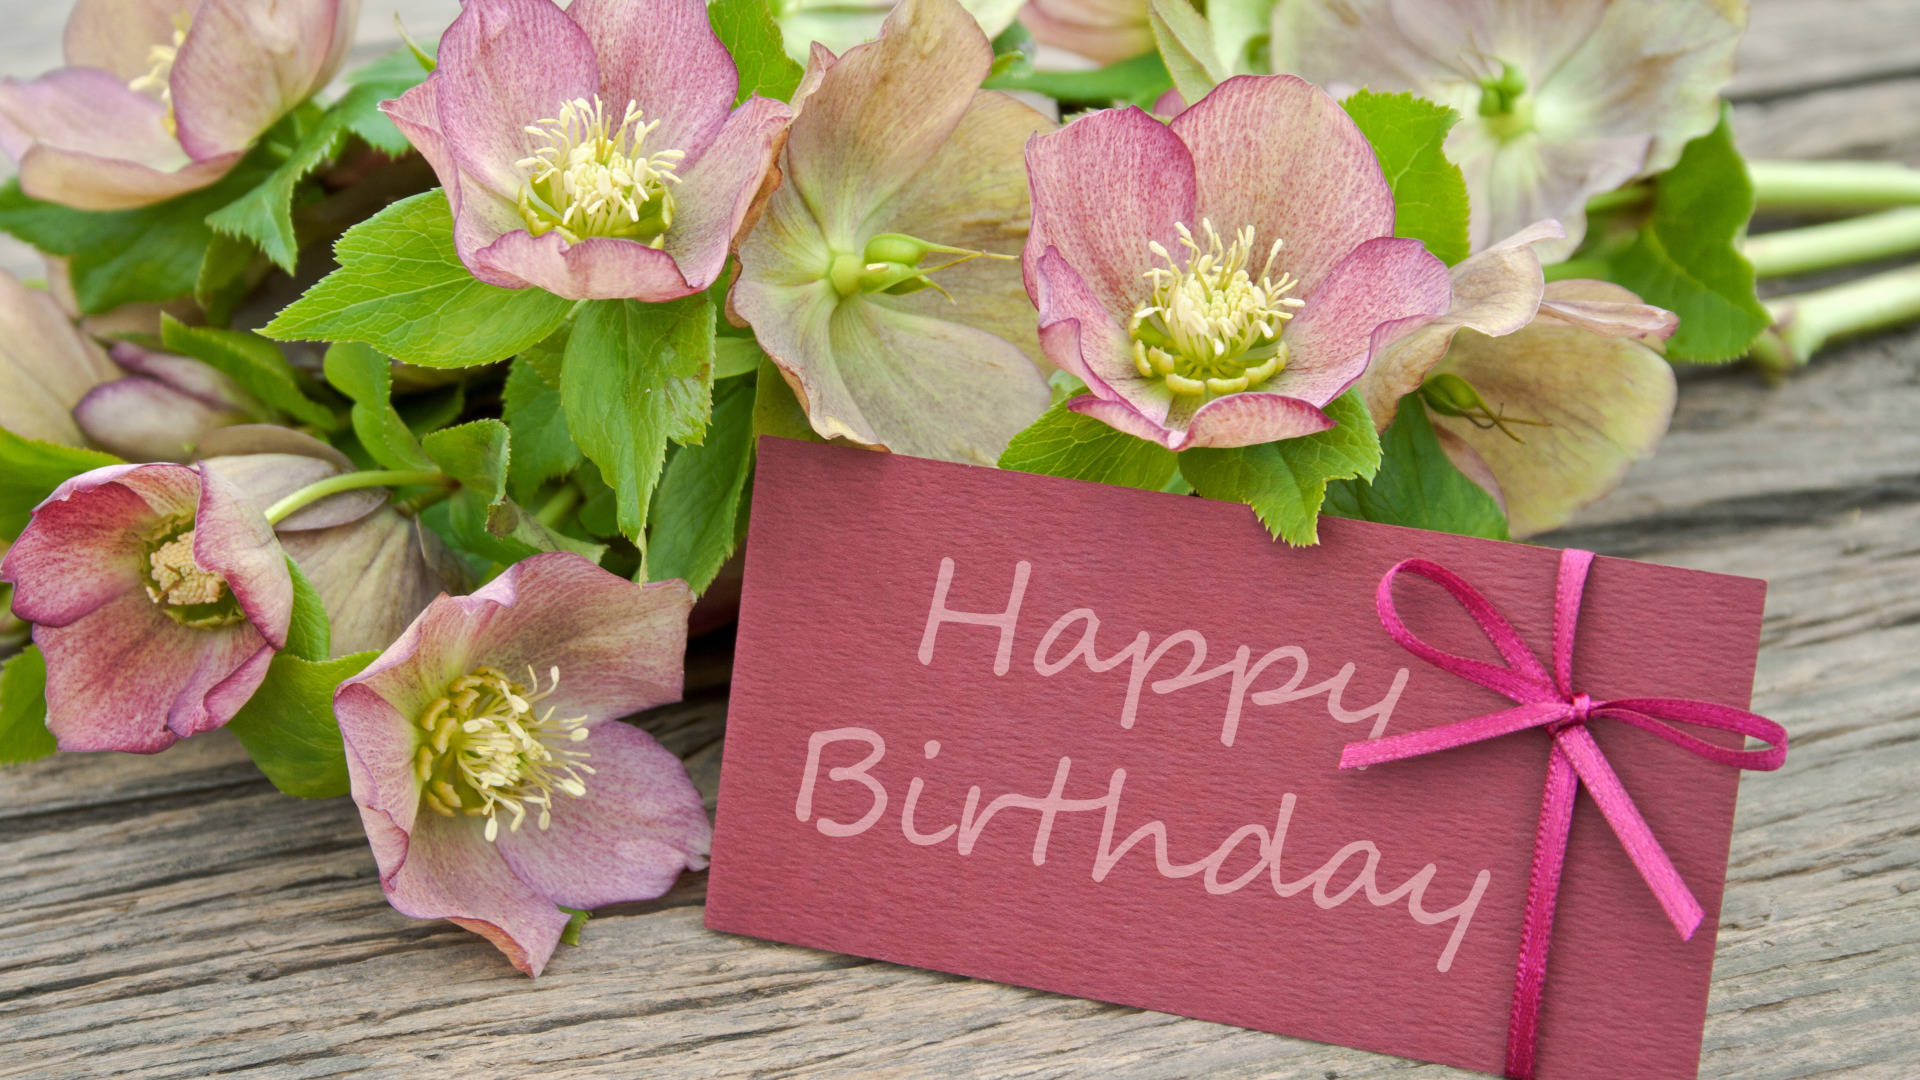 Happy Birthday Flower With Greeting Card